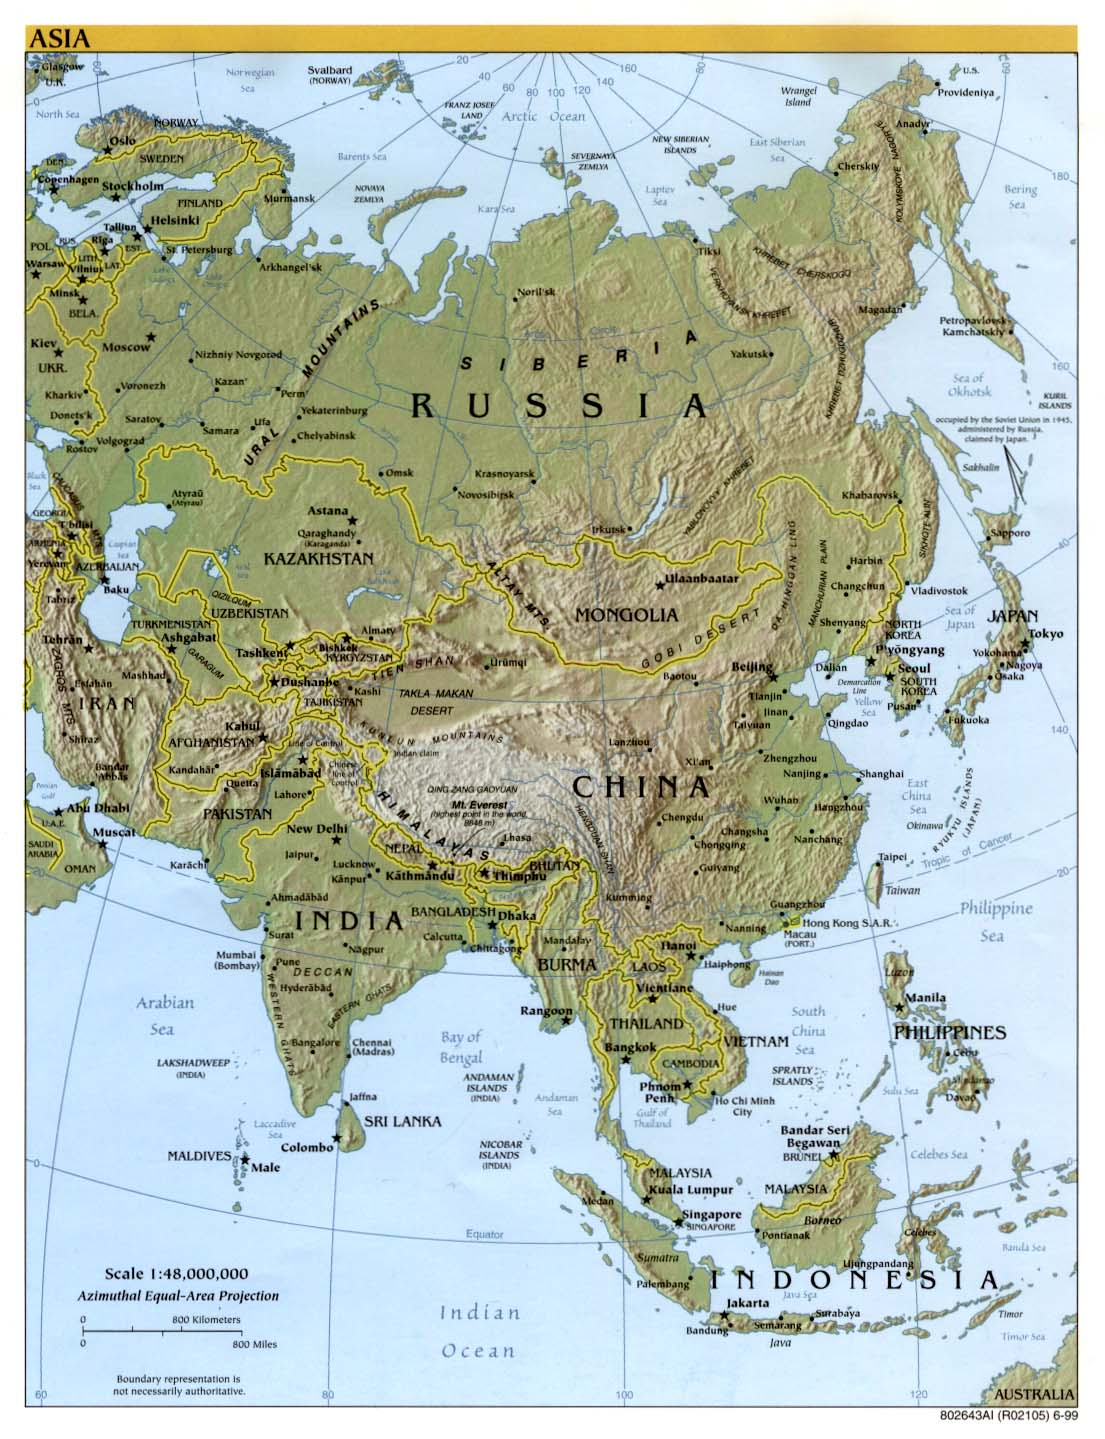  Asia physical map  1999 Full size